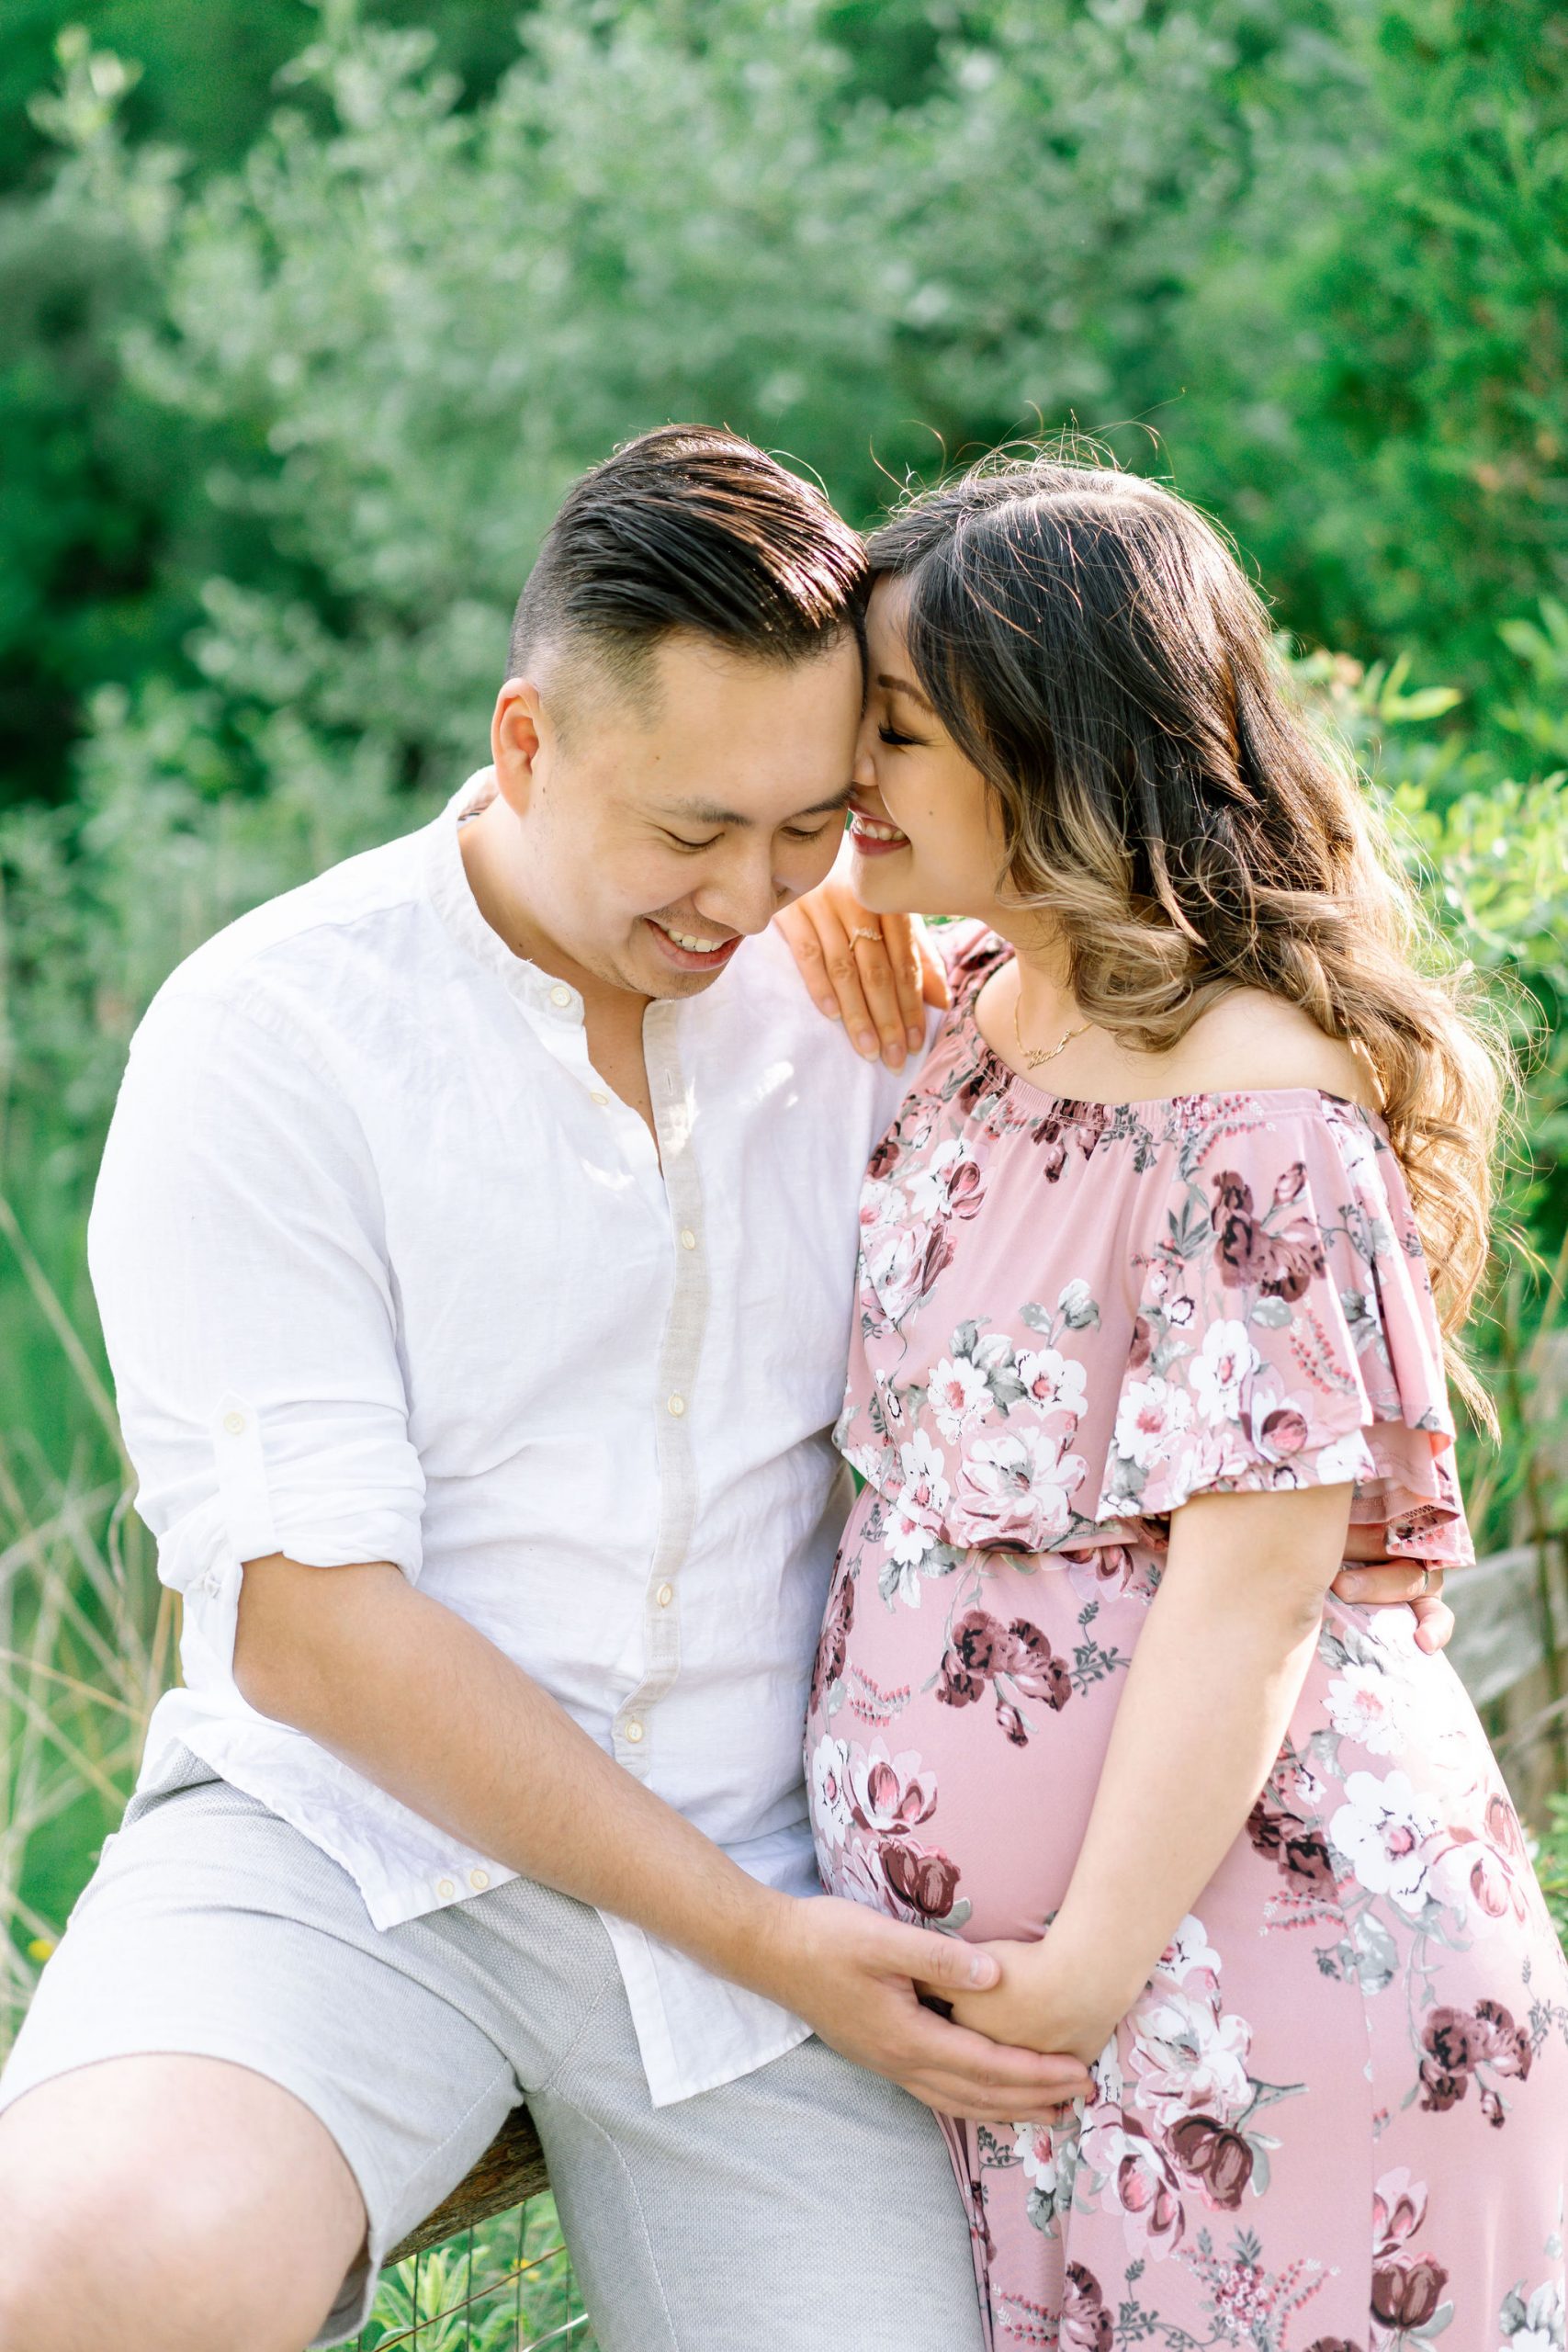 Pregnant woman laughing with husband during their maternity session with Joee Wong.